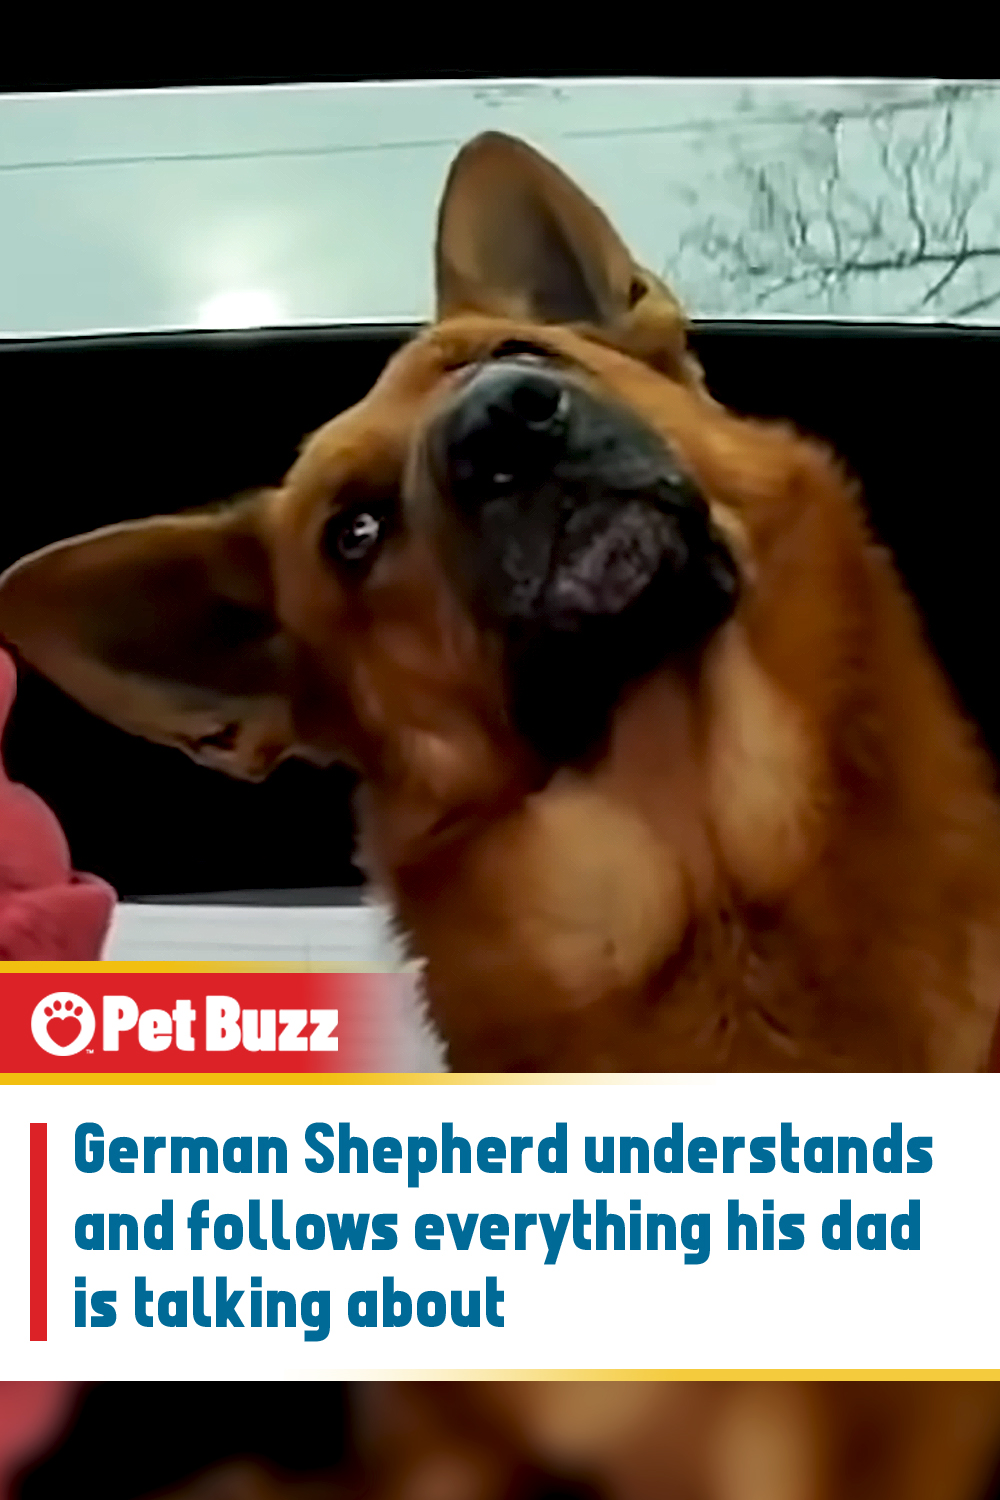 German Shepherd understands and follows everything his dad is talking about